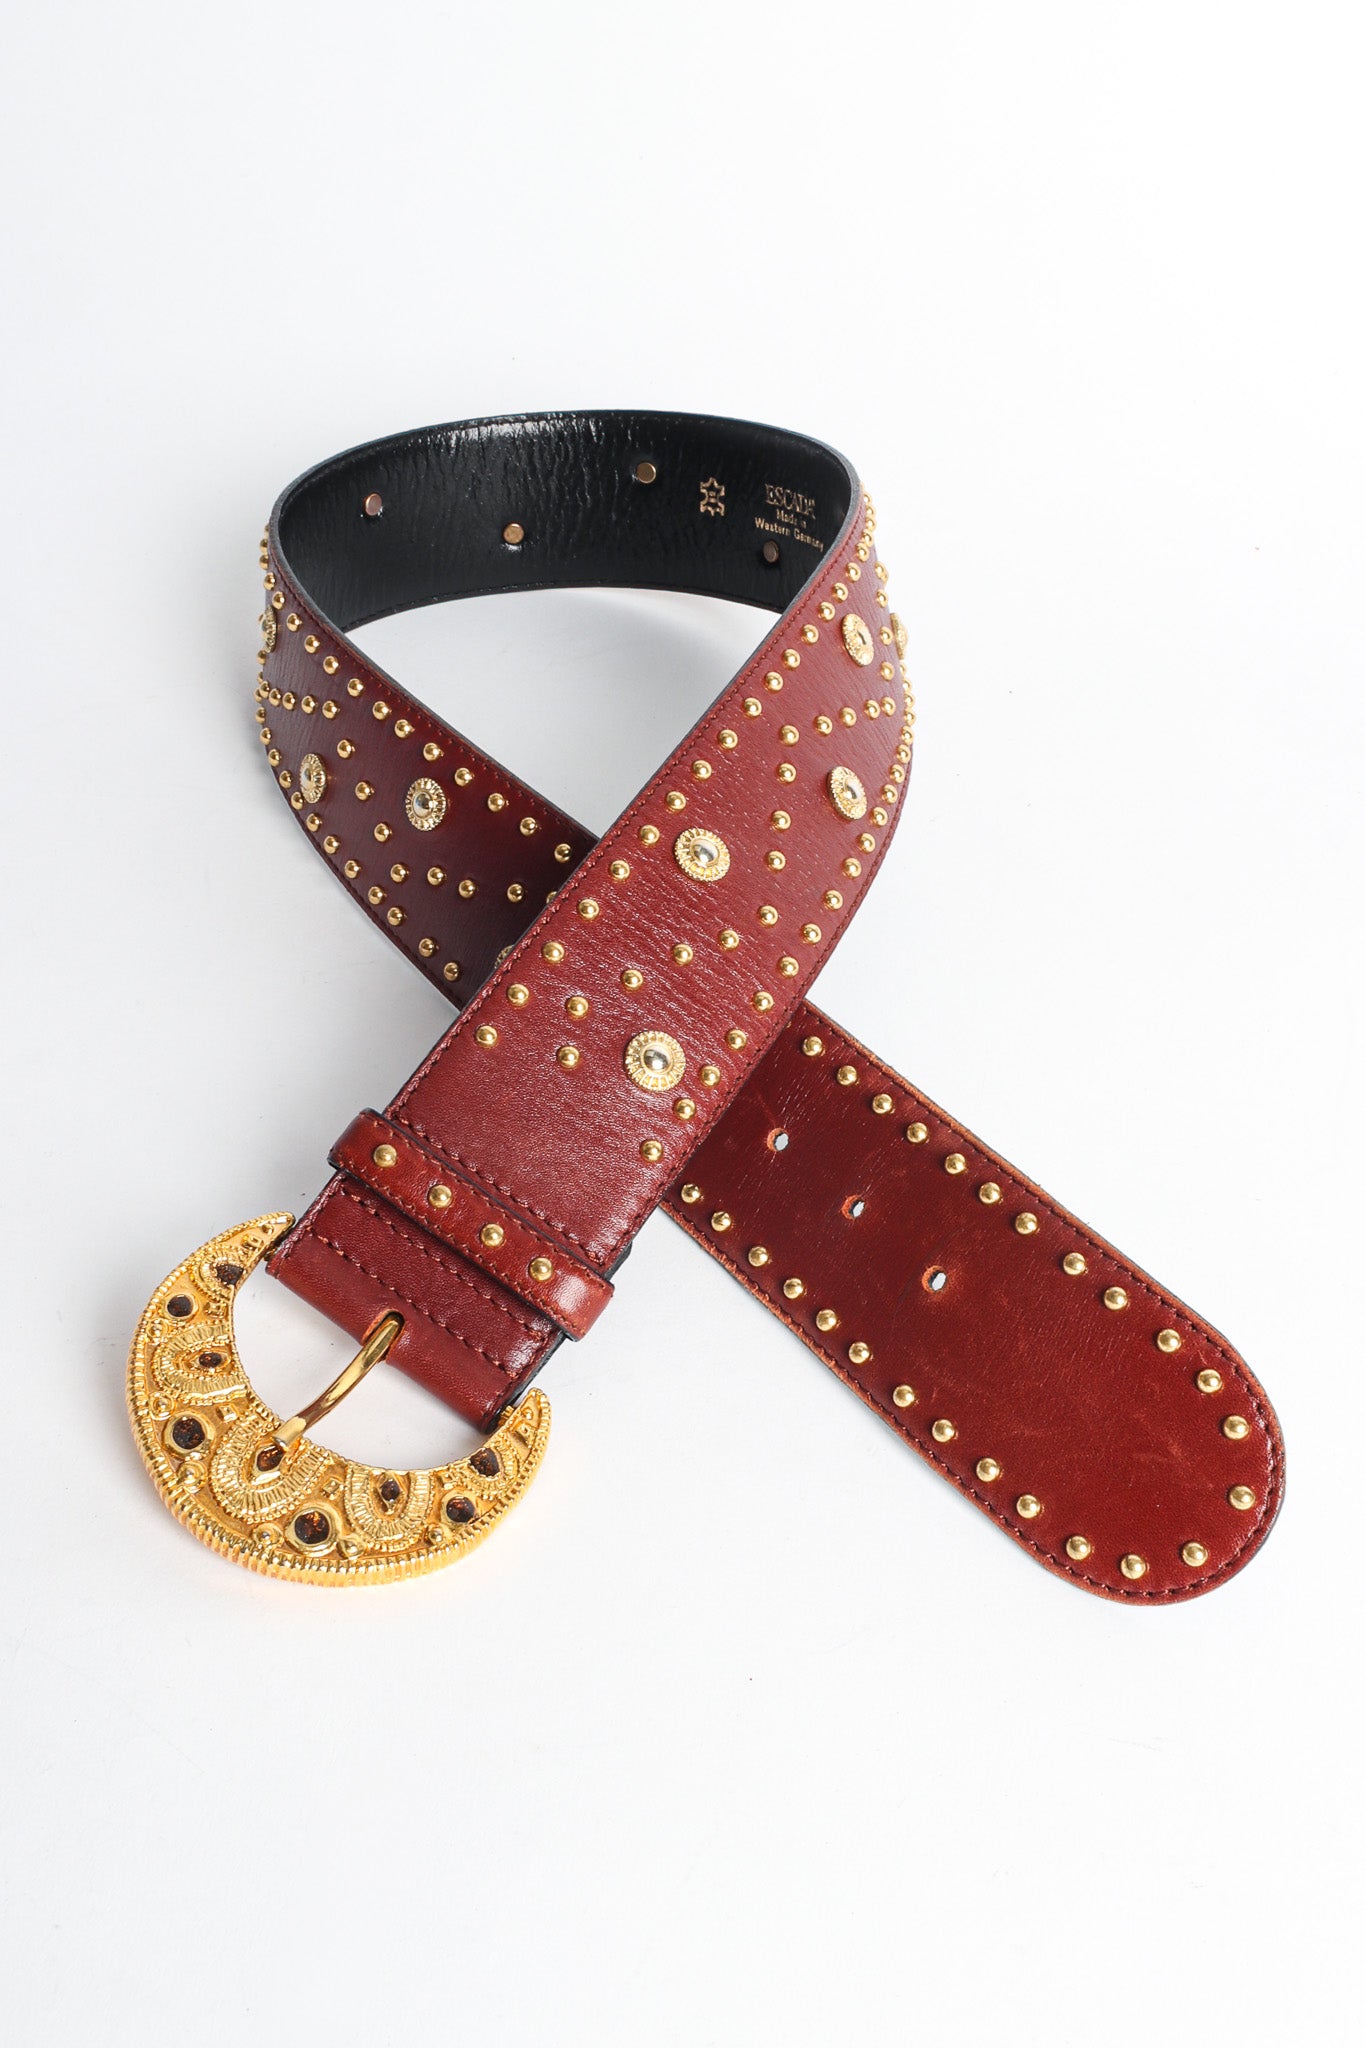 Wide cinnamon brown leather belt with gold sunshine studs by Escada loop flat lay @recessla